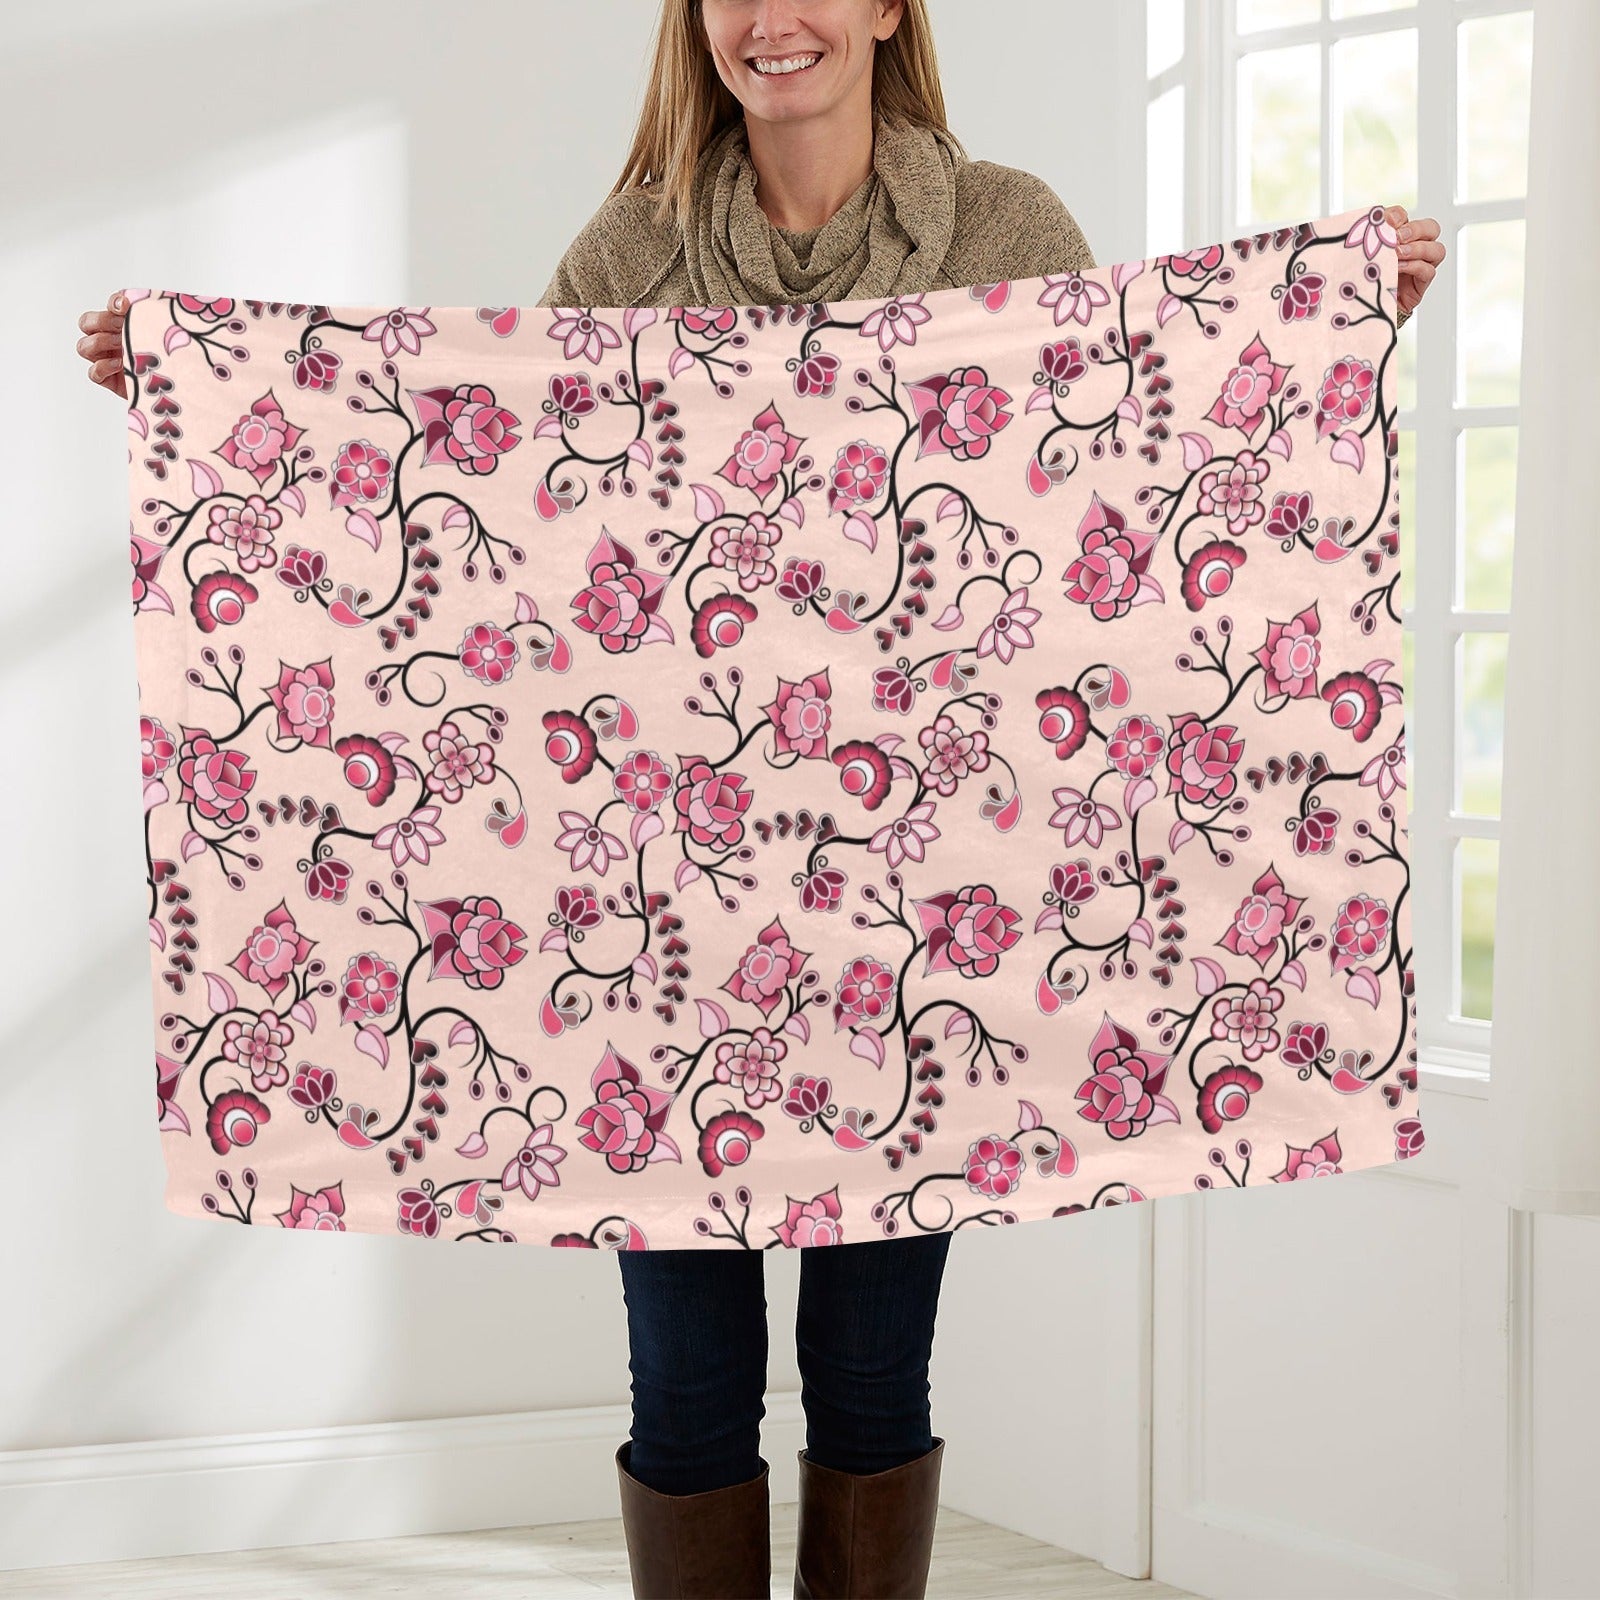 Floral Amour Baby Blanket 30"x40" Baby Blanket 30"x40" e-joyer 